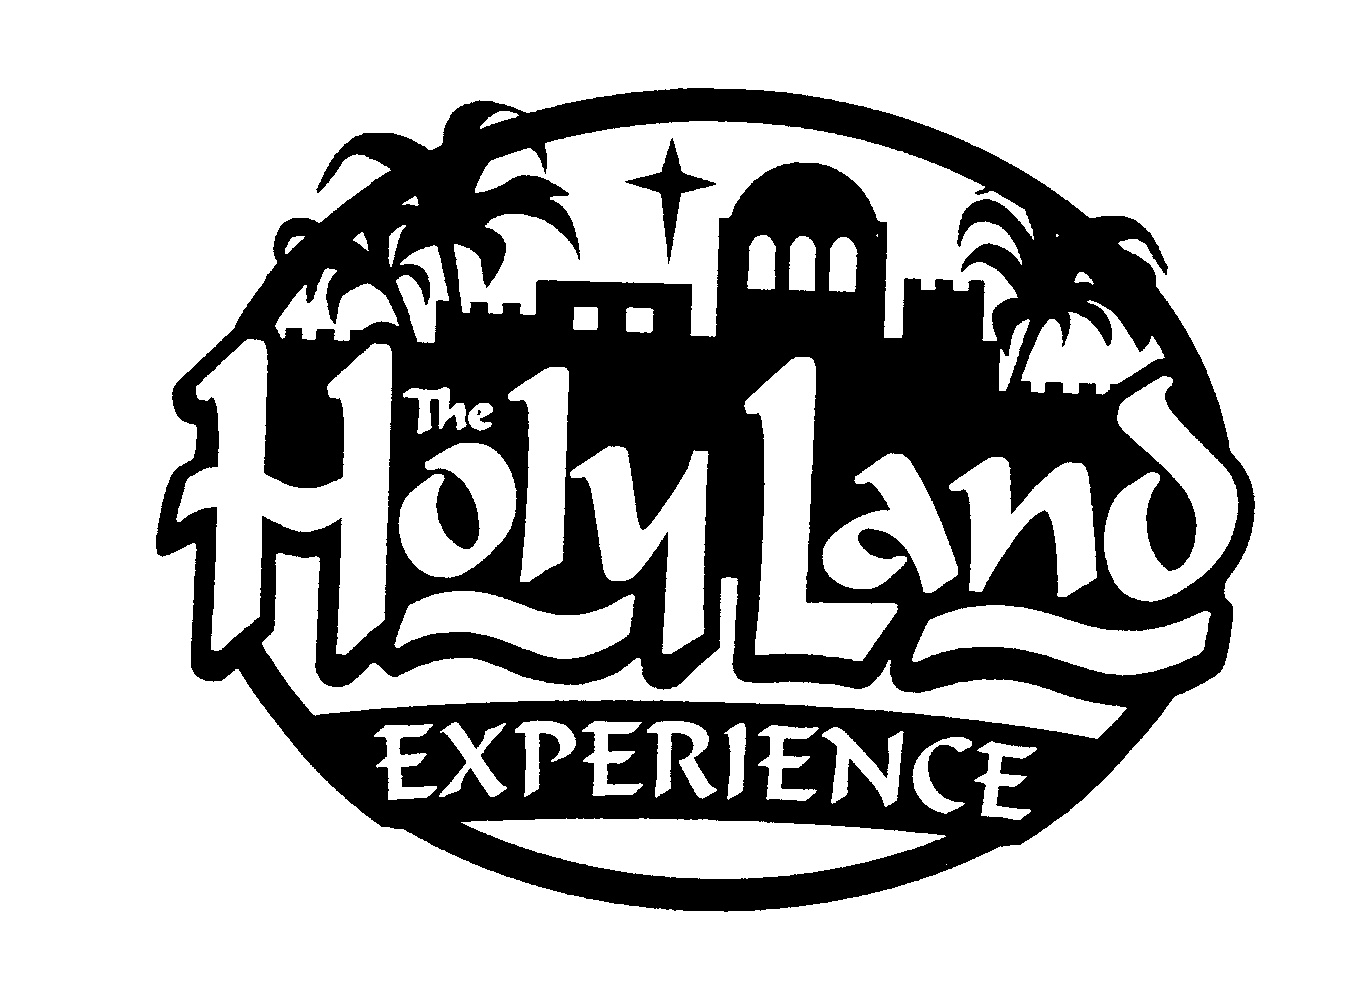 THE HOLY LAND EXPERIENCE